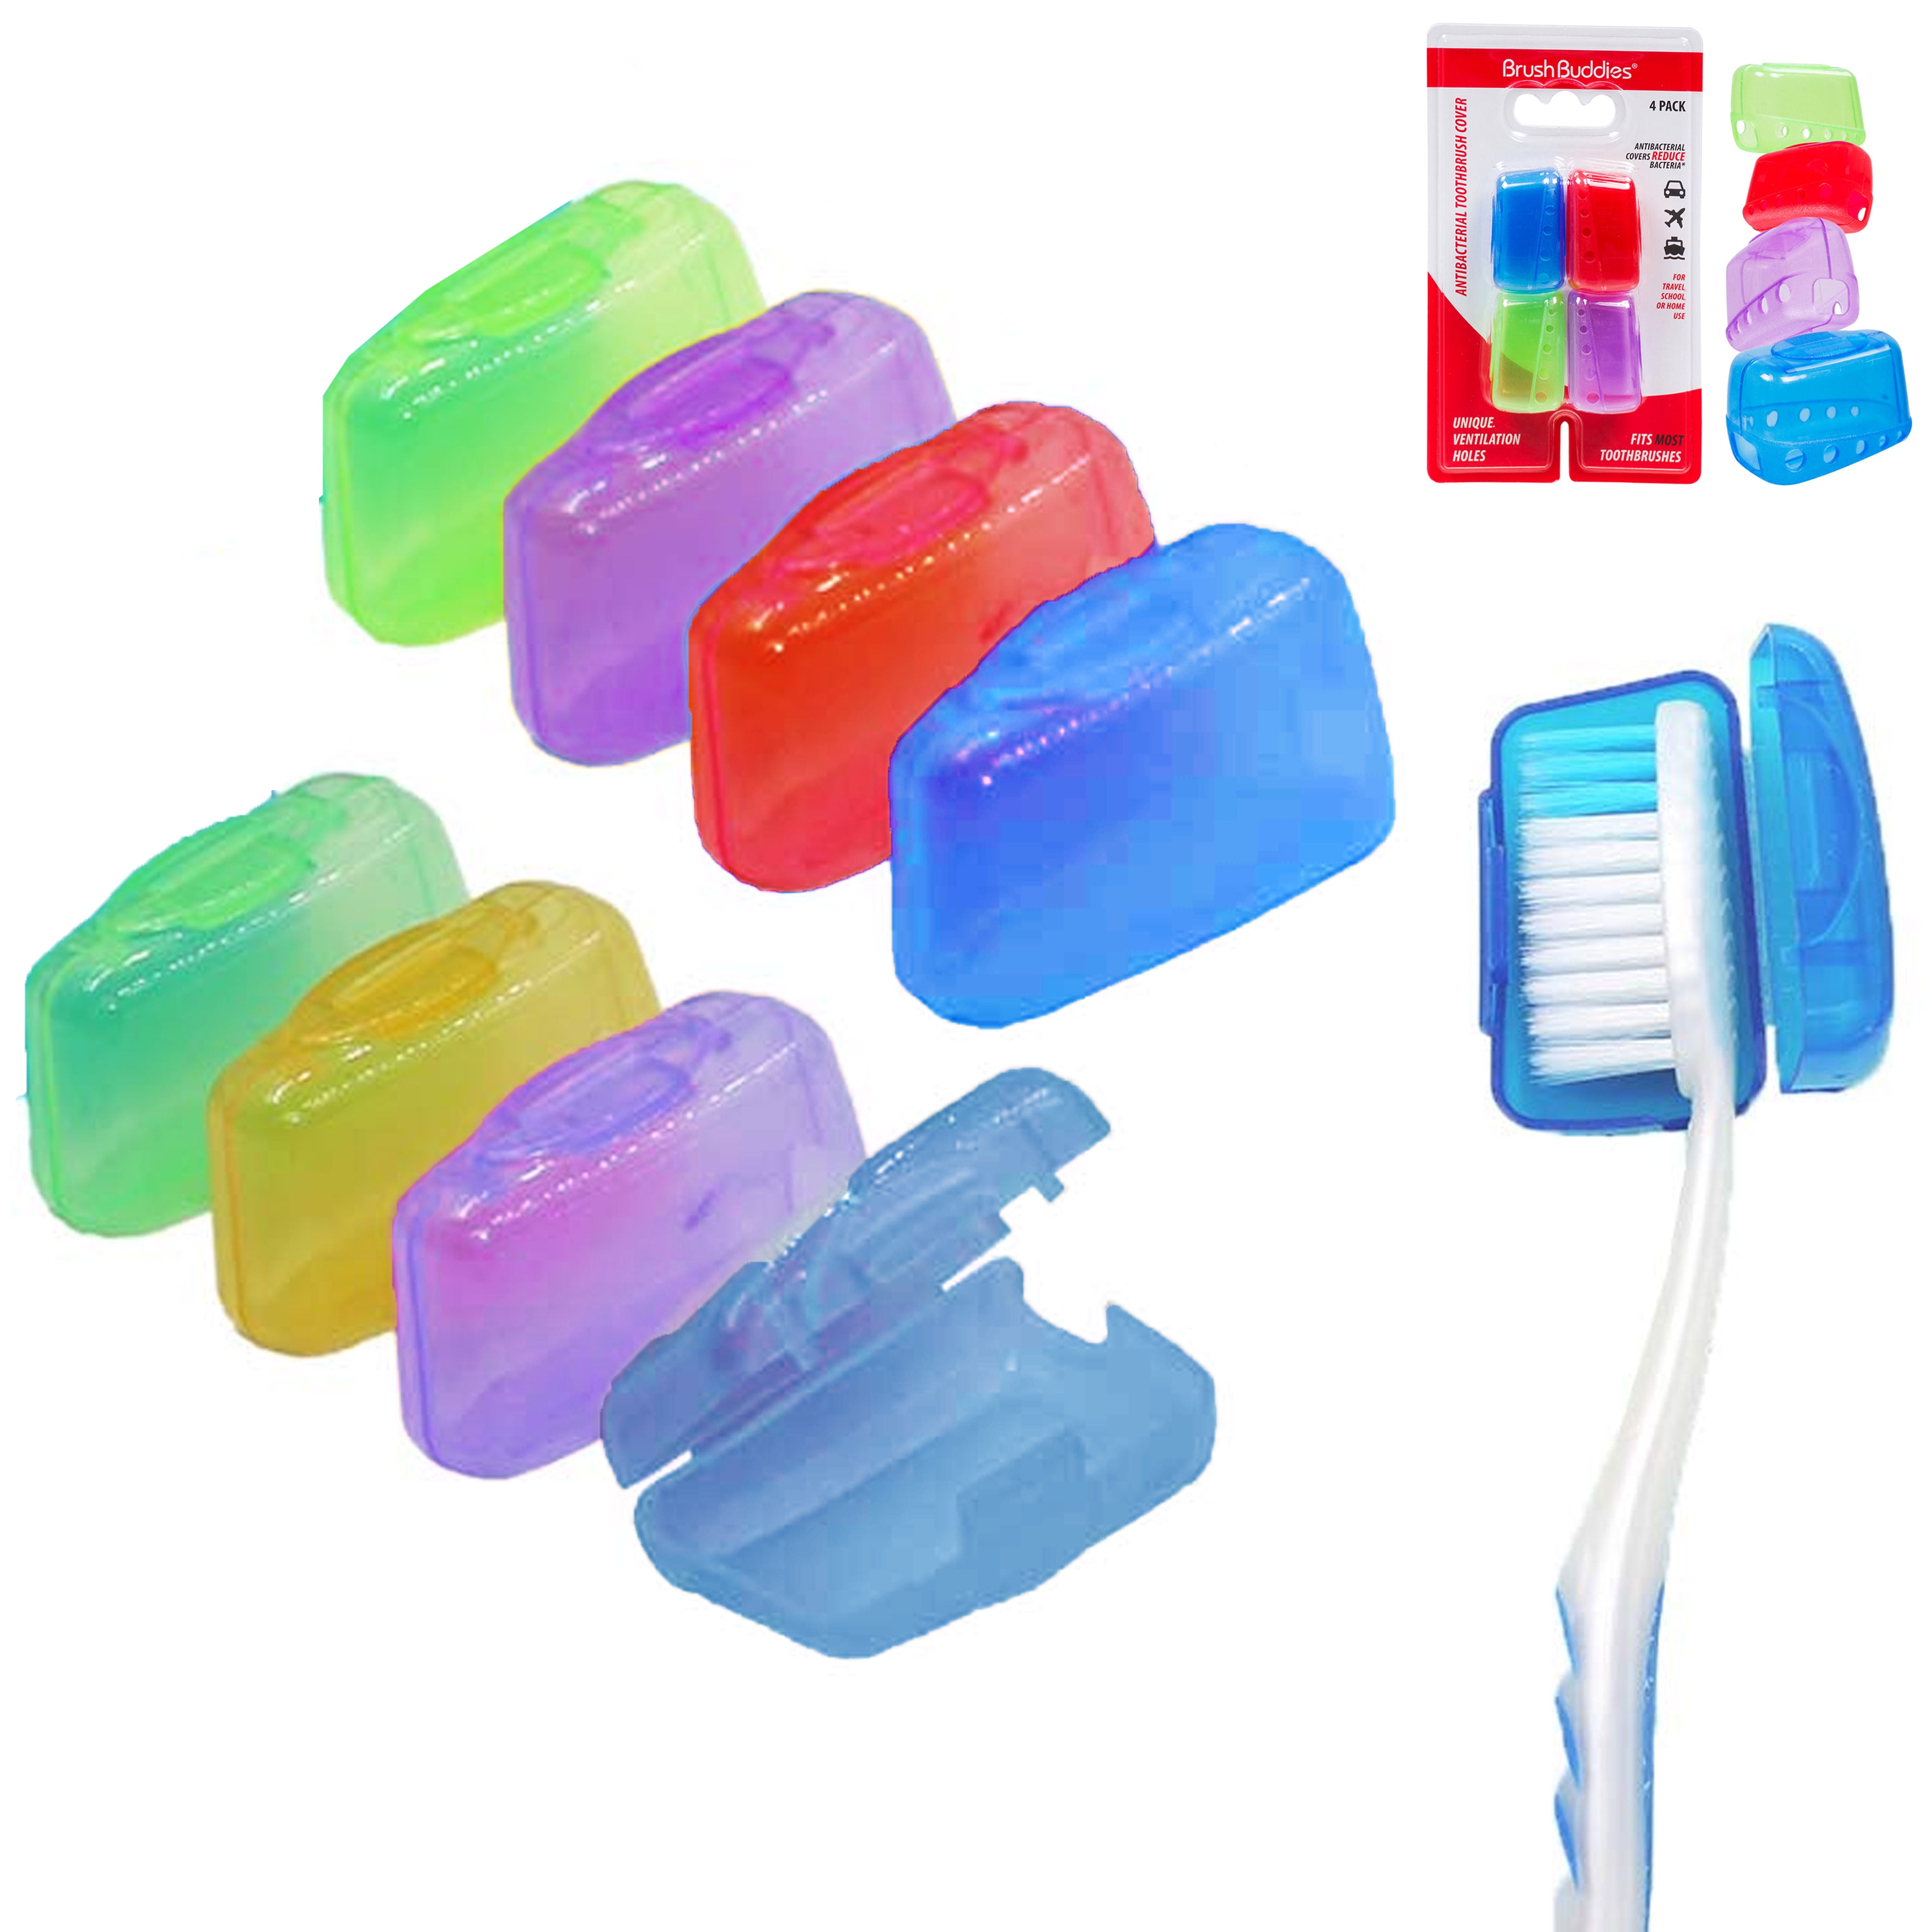 Portable Toothbrush Cover Case Holder Plastic Storage Box Travel Camping B13us 